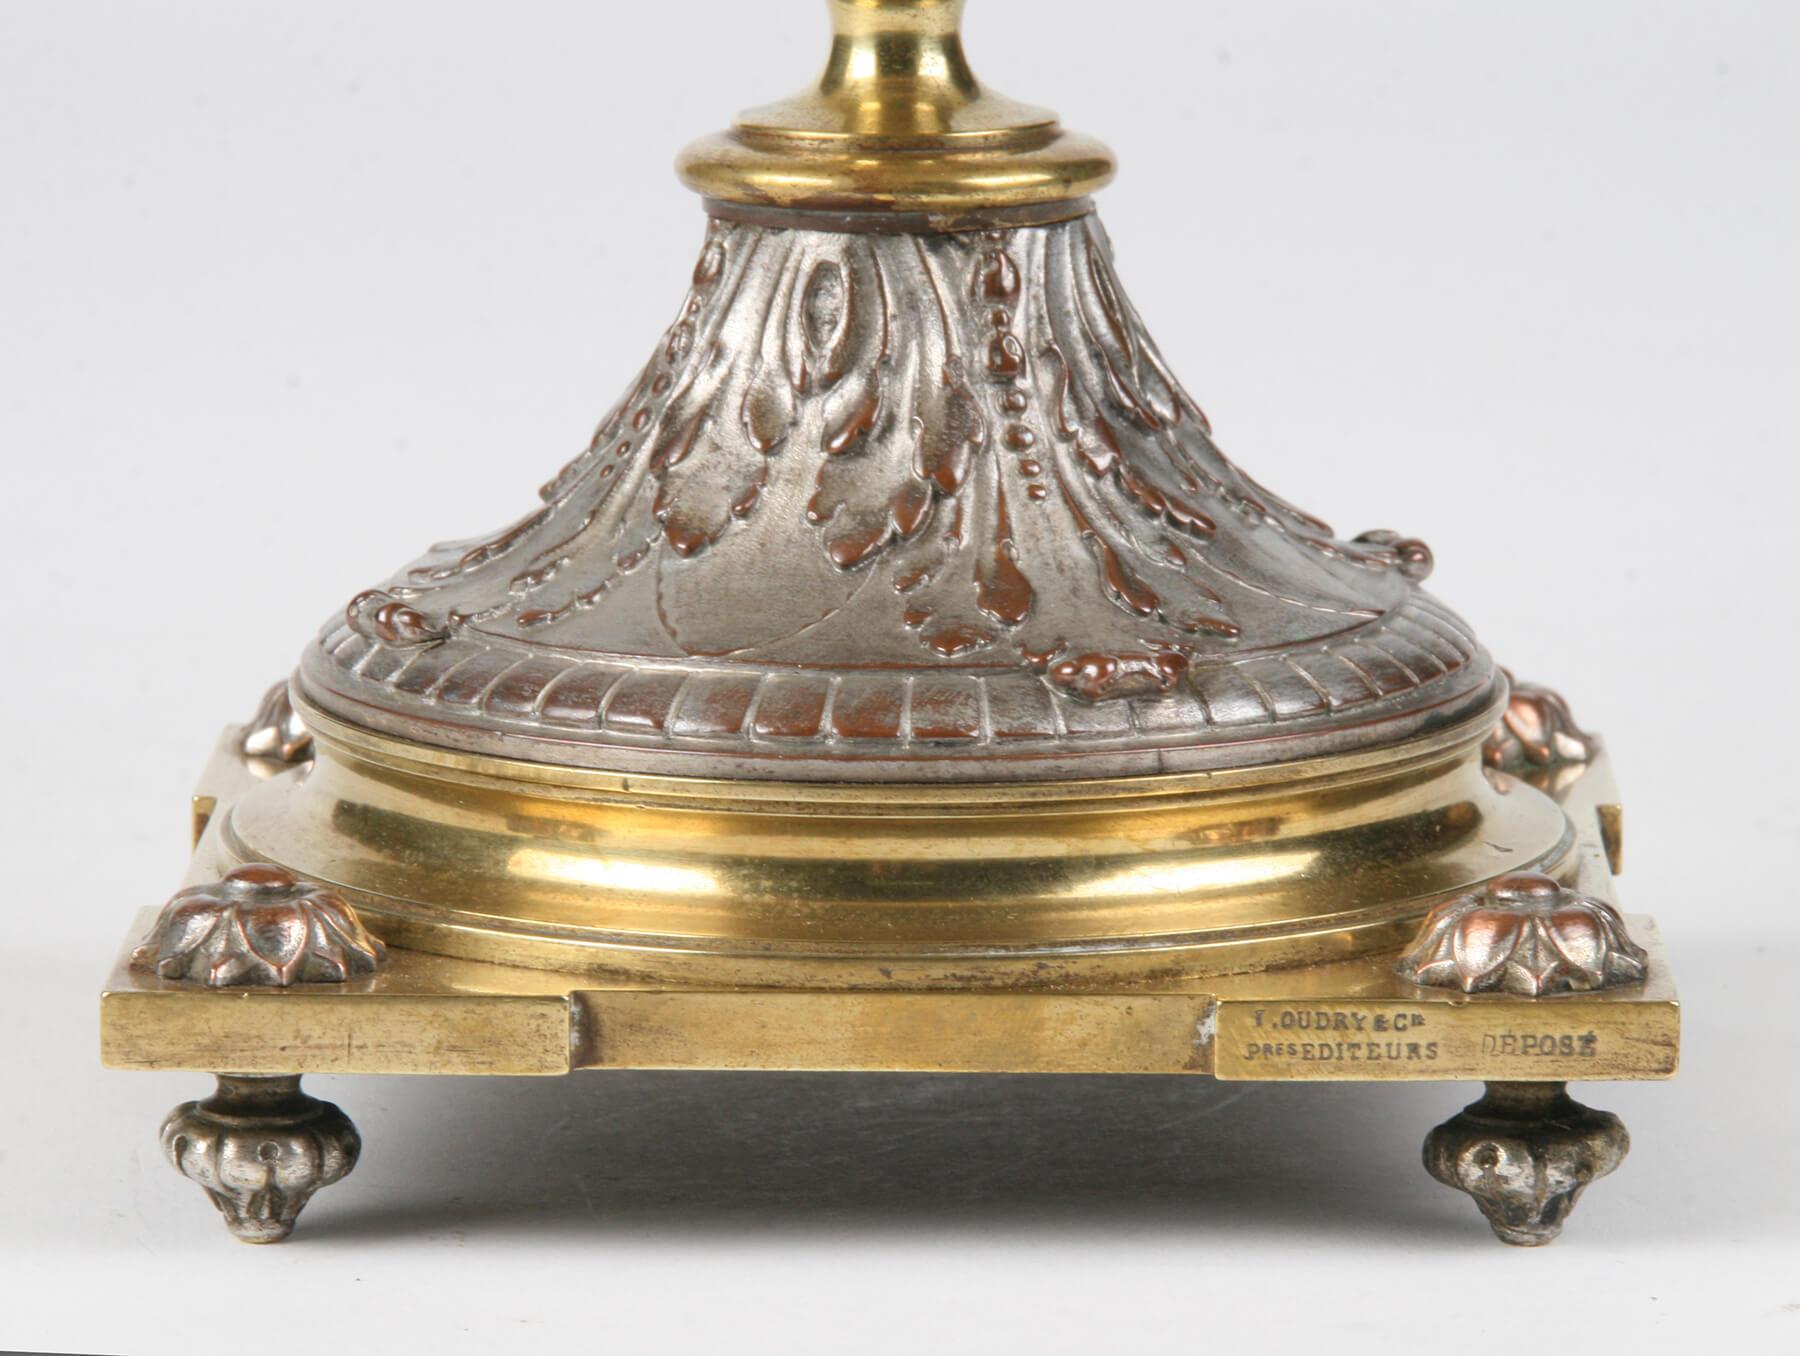 Belle Époque 19th Century Bronze and Copper Tazza Dish, Casted by Leopold Oudry, Paris